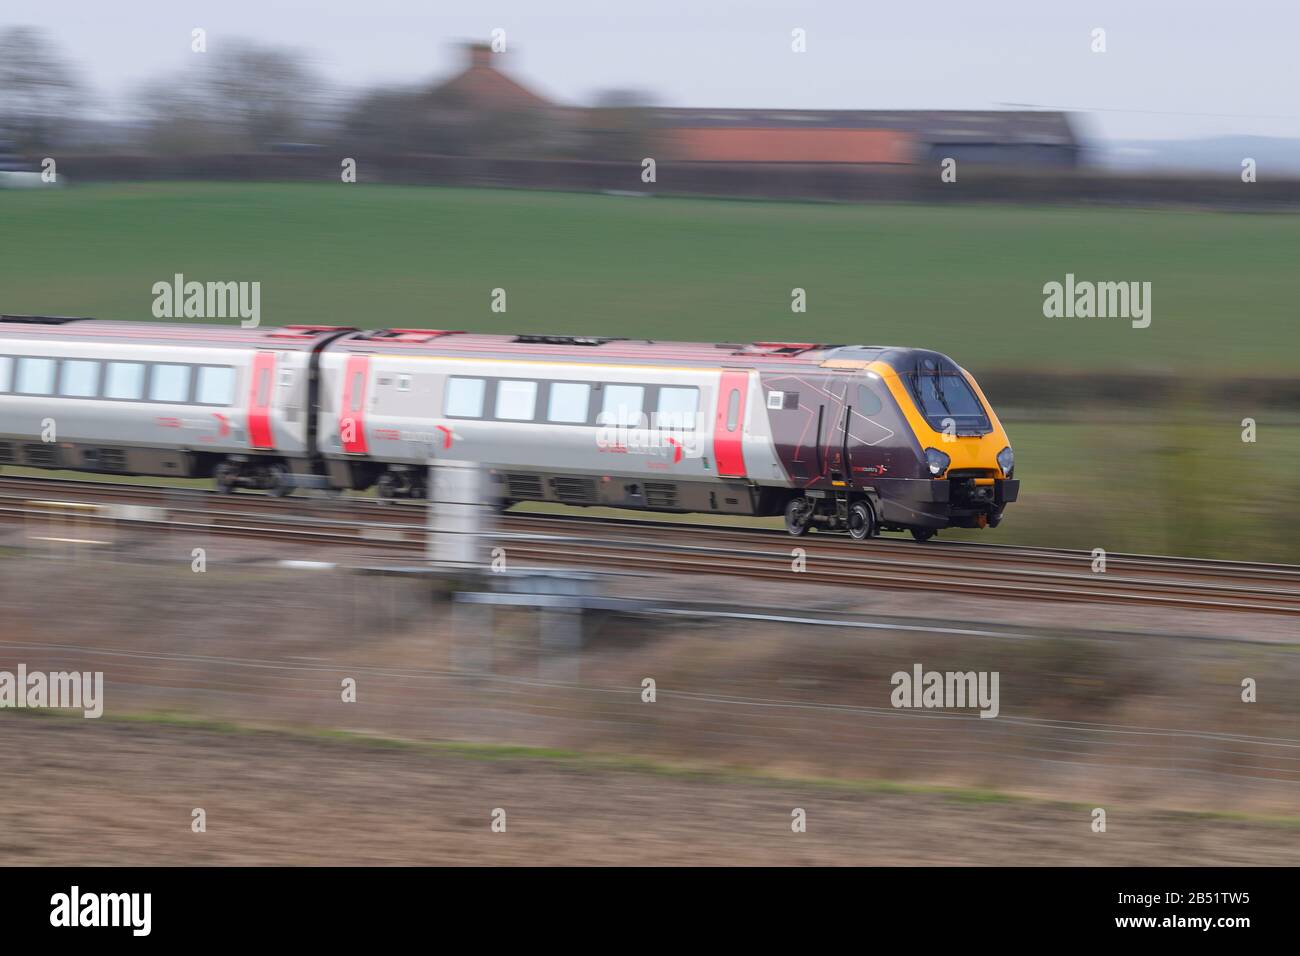 A British Rail Class 220 operated by Cross Country by Arriva seen at Colton Junction near York. Stock Photo